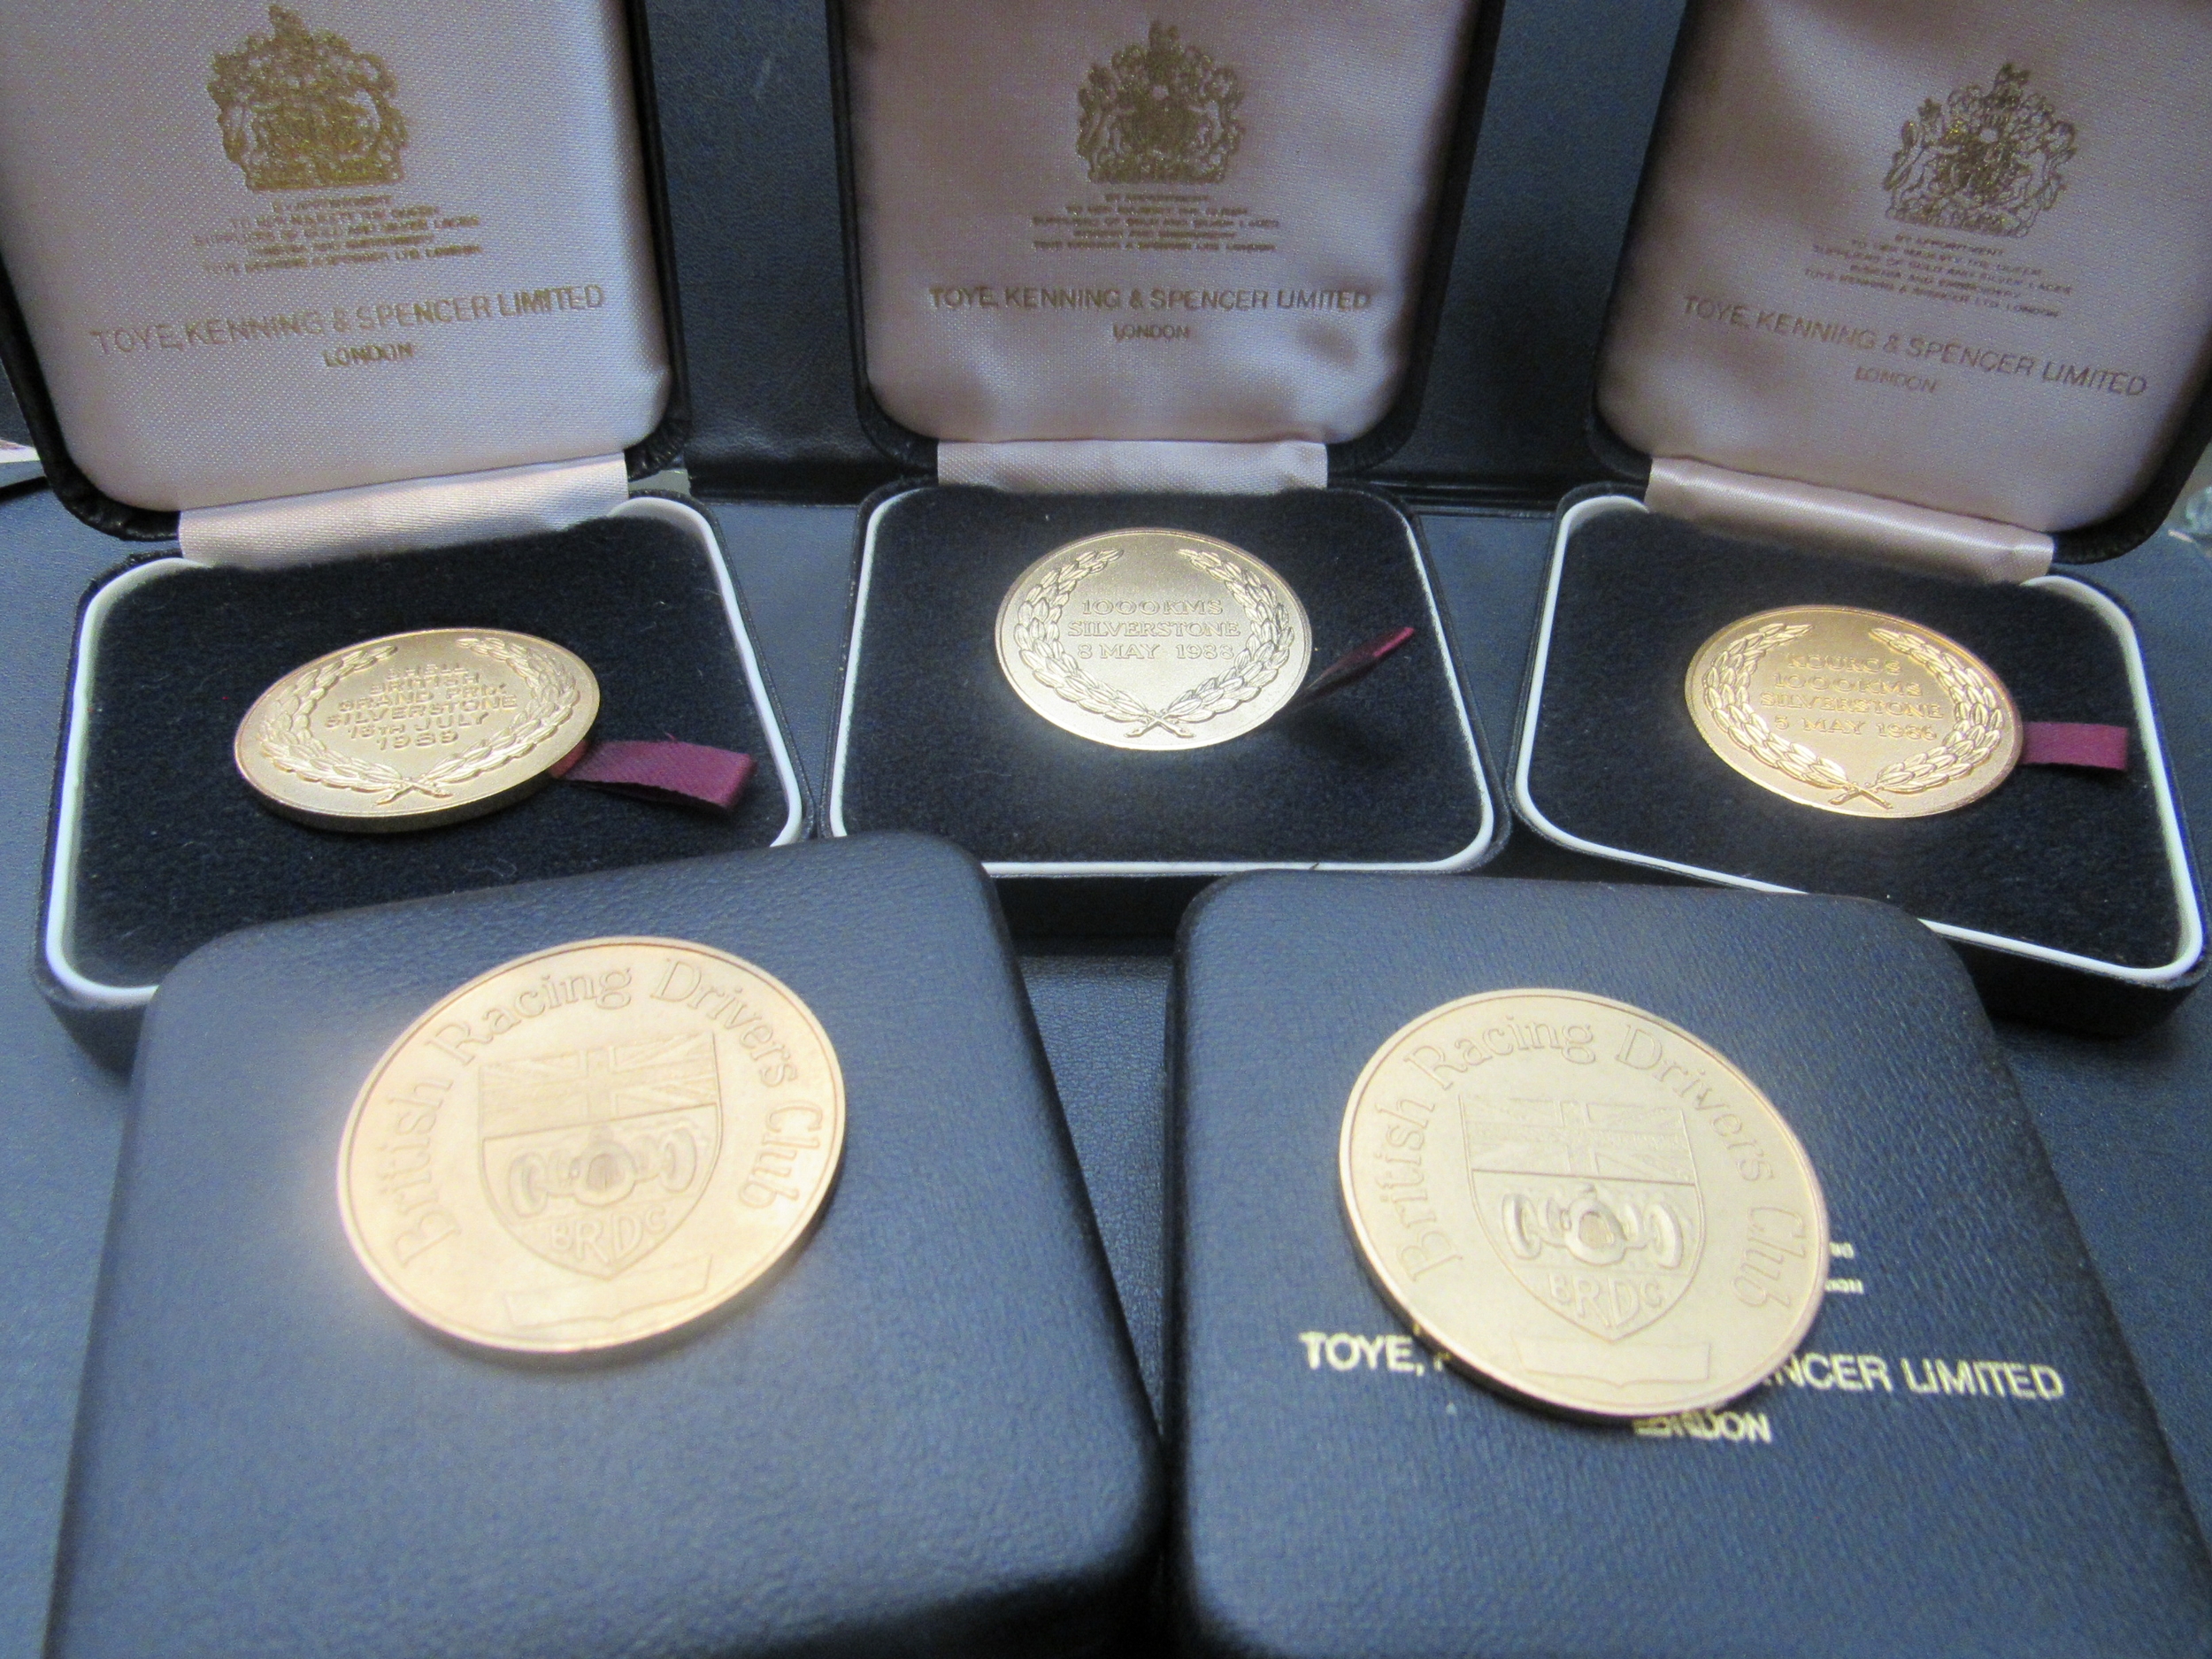 Five British Racing Drivers club medallions in cases. 1985, 86, 87, 88, and 1989